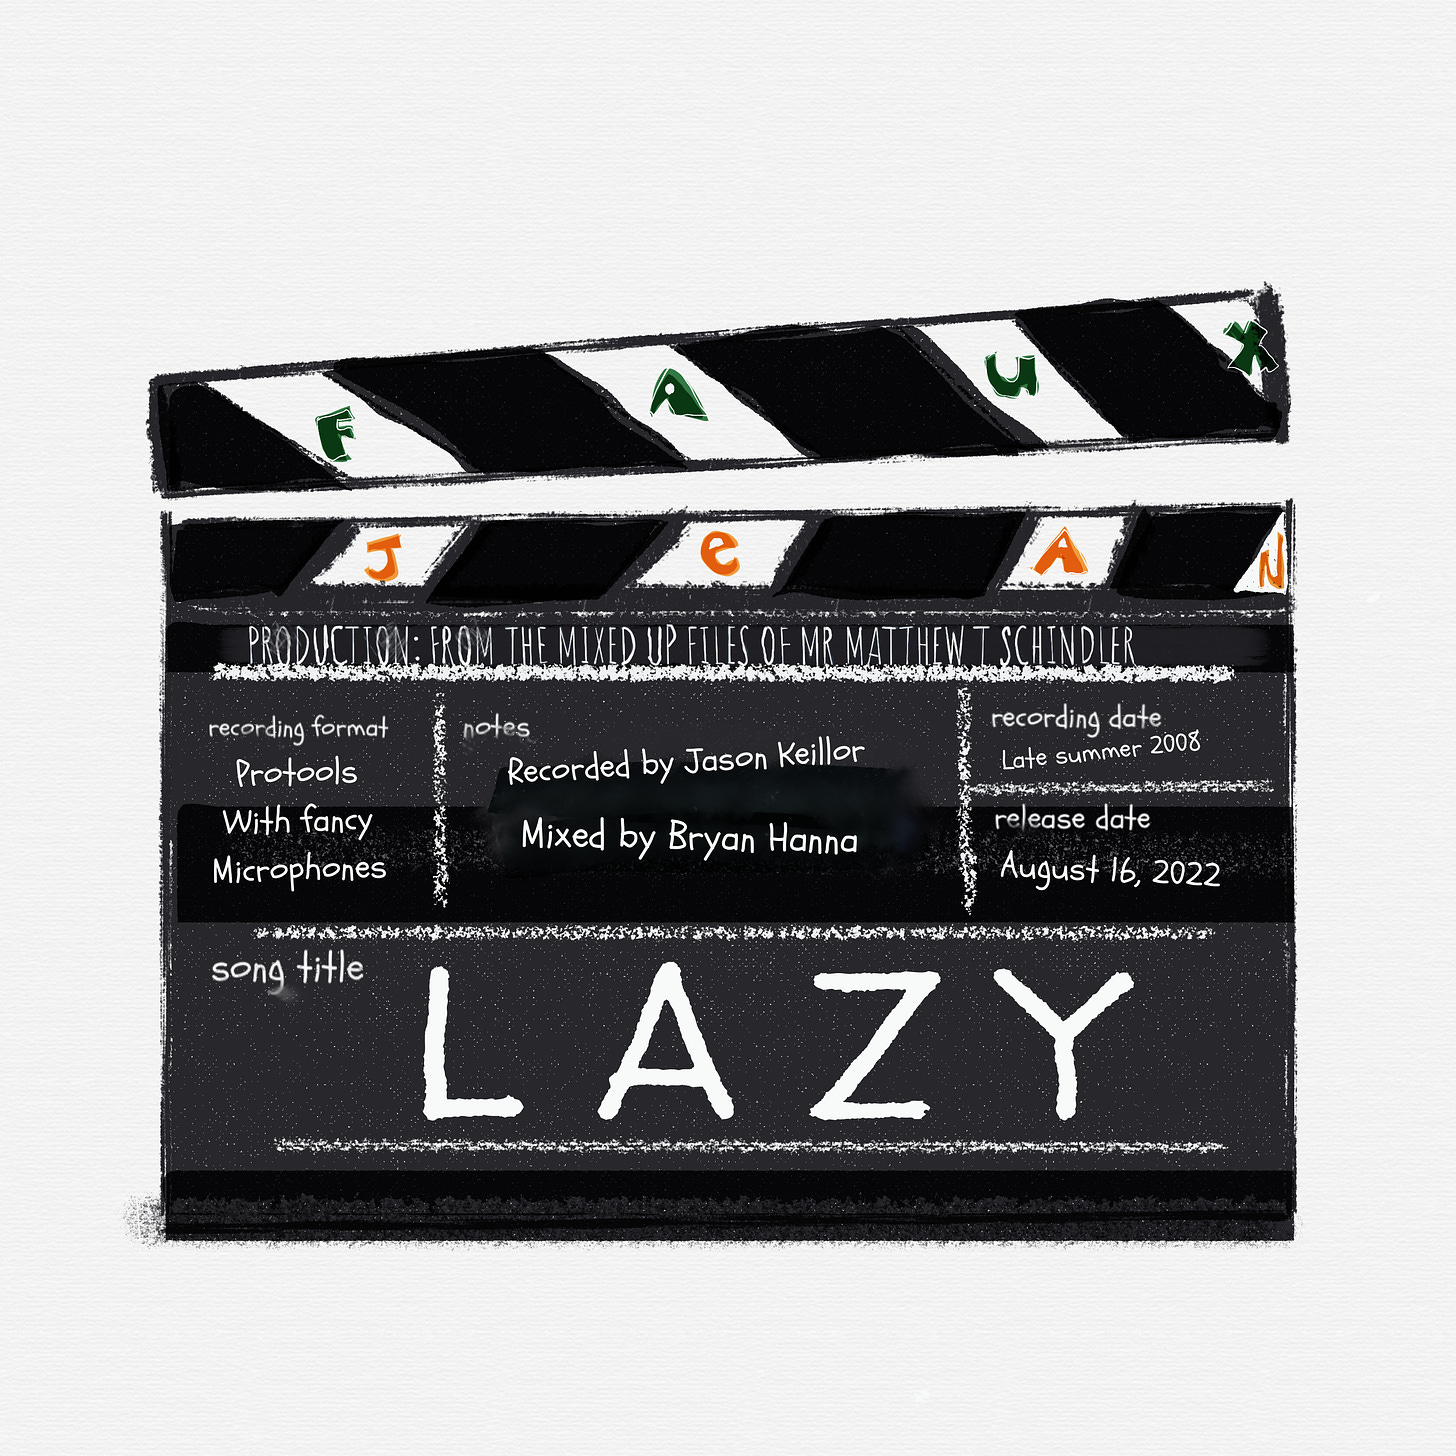 Artwork for the song "Lazy."